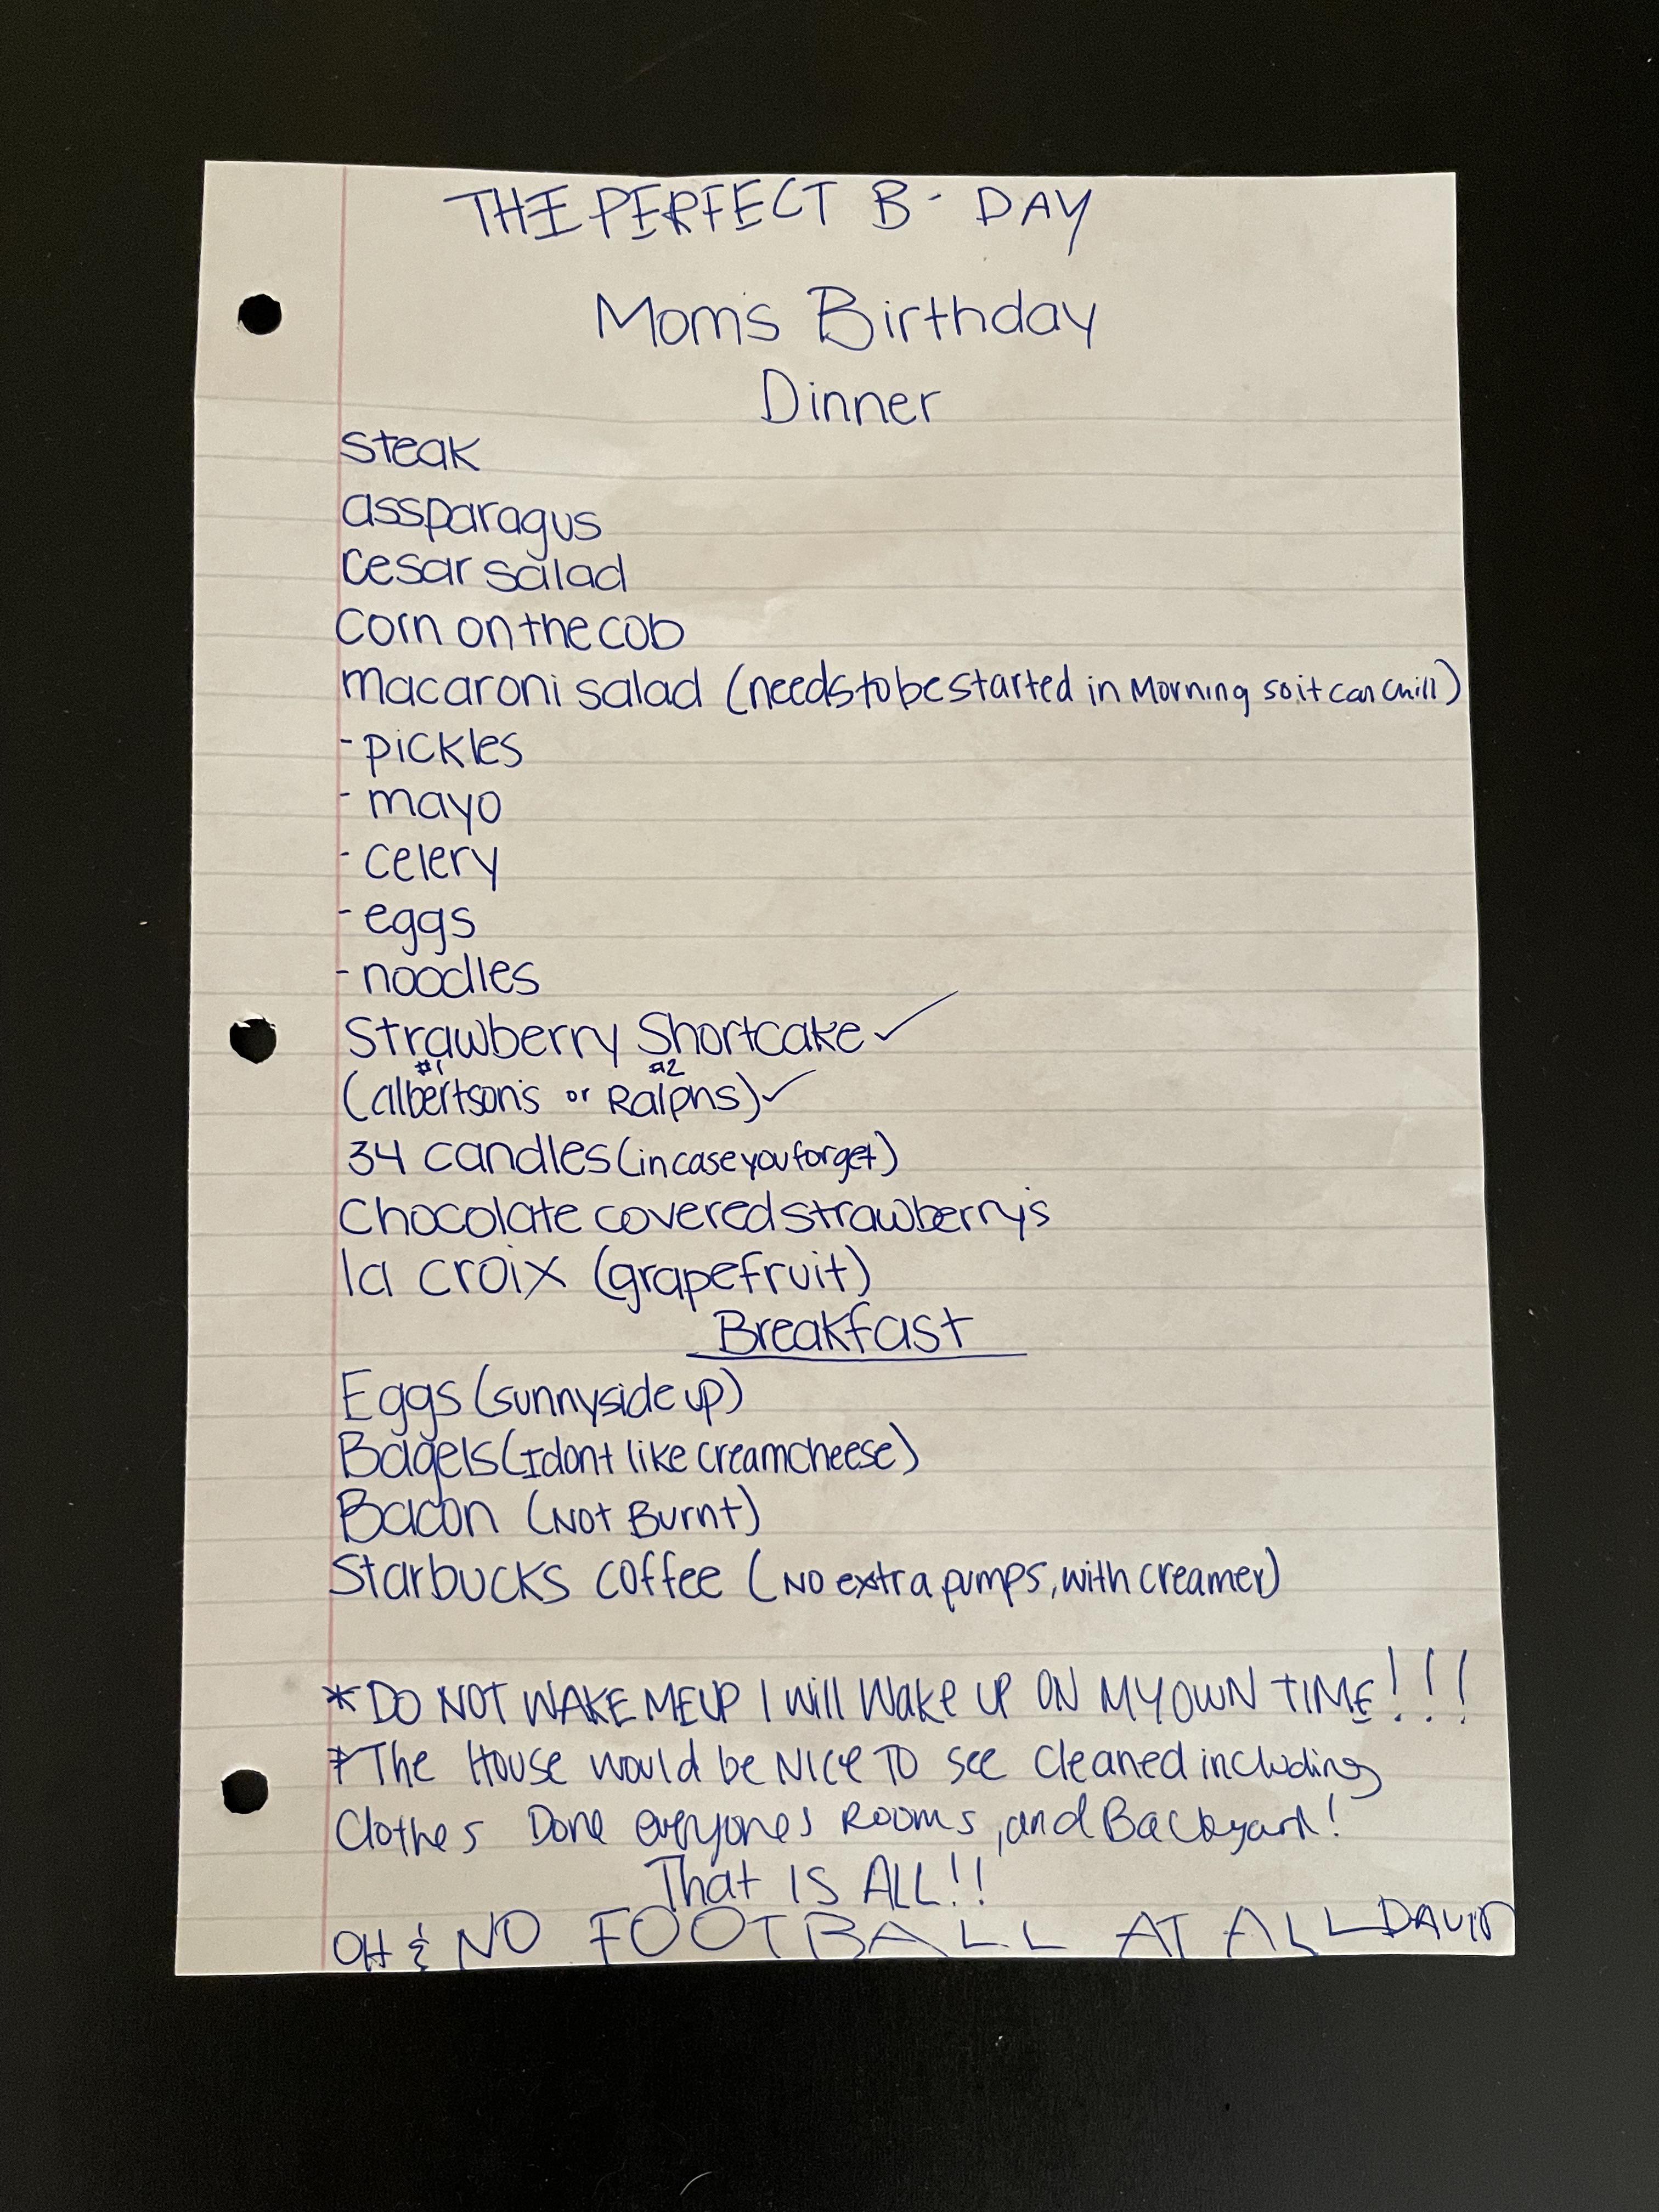 My sisters birthday wish list. Her husband has been asking all week if he can watch football on her birthday.